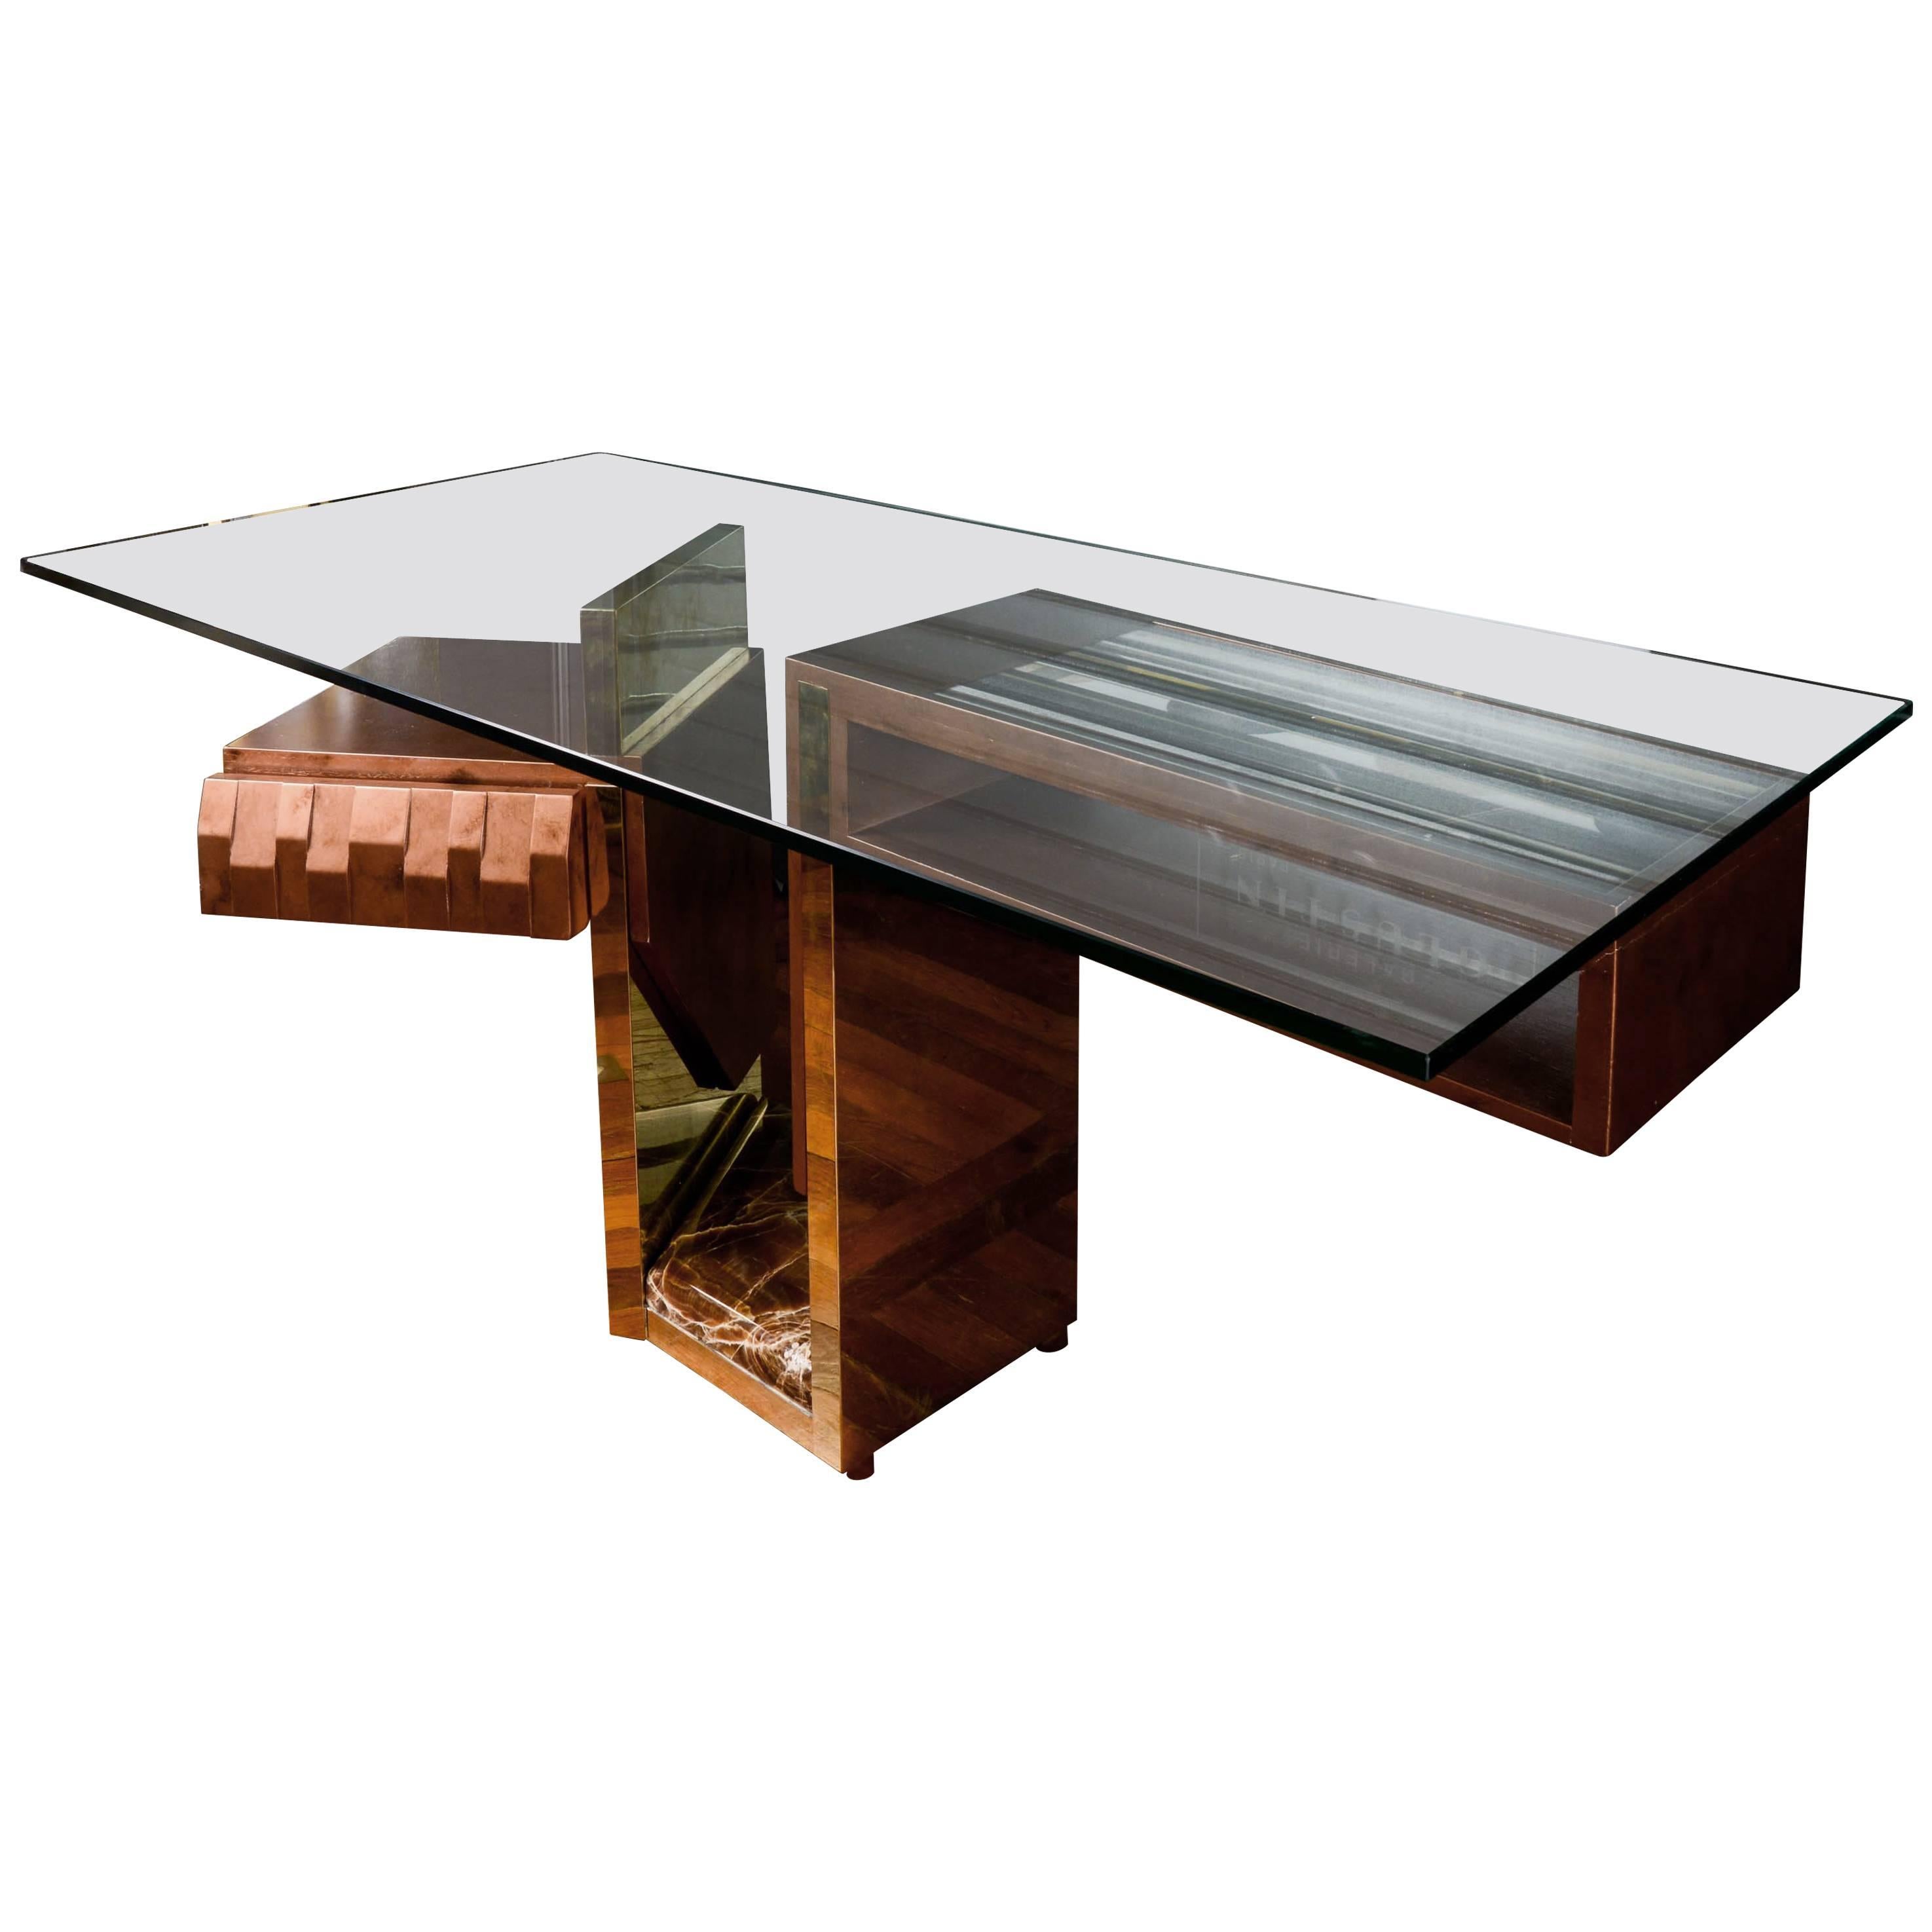 Modern Wood and Glass Desk at cost price.